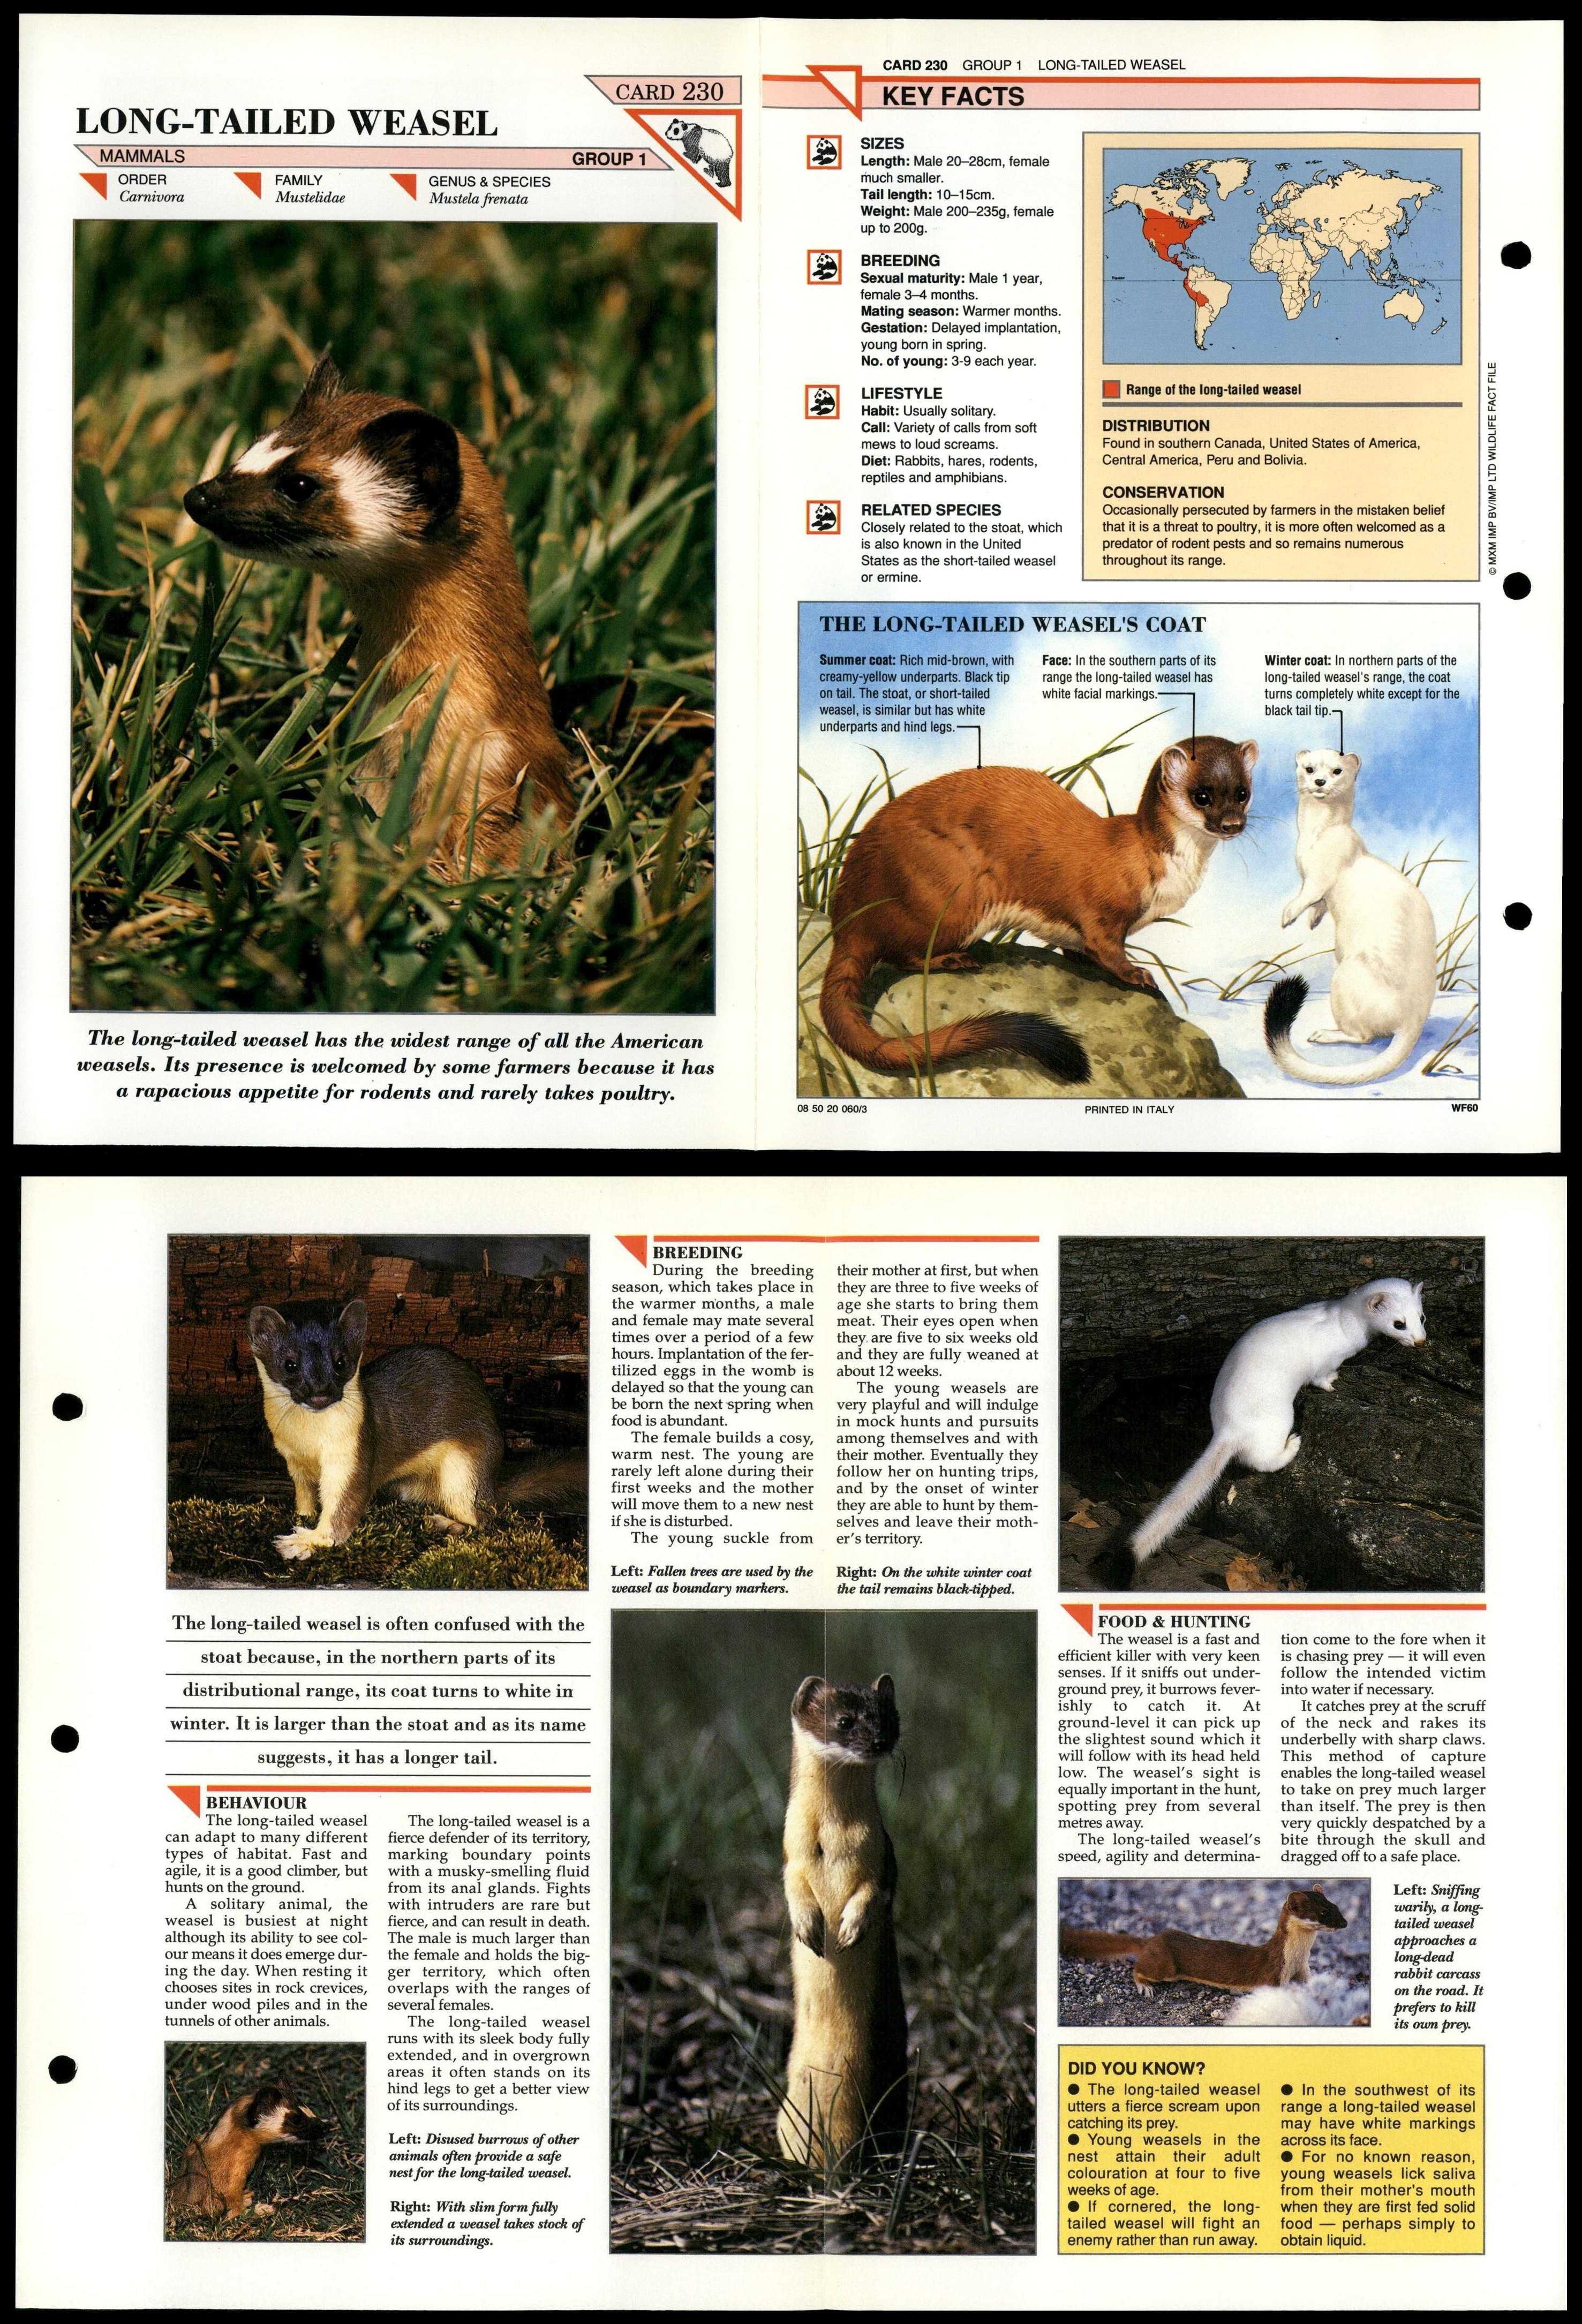 Long-Tailed Weasel #230 Mammals Wildlife Fact File Fold-Out Card